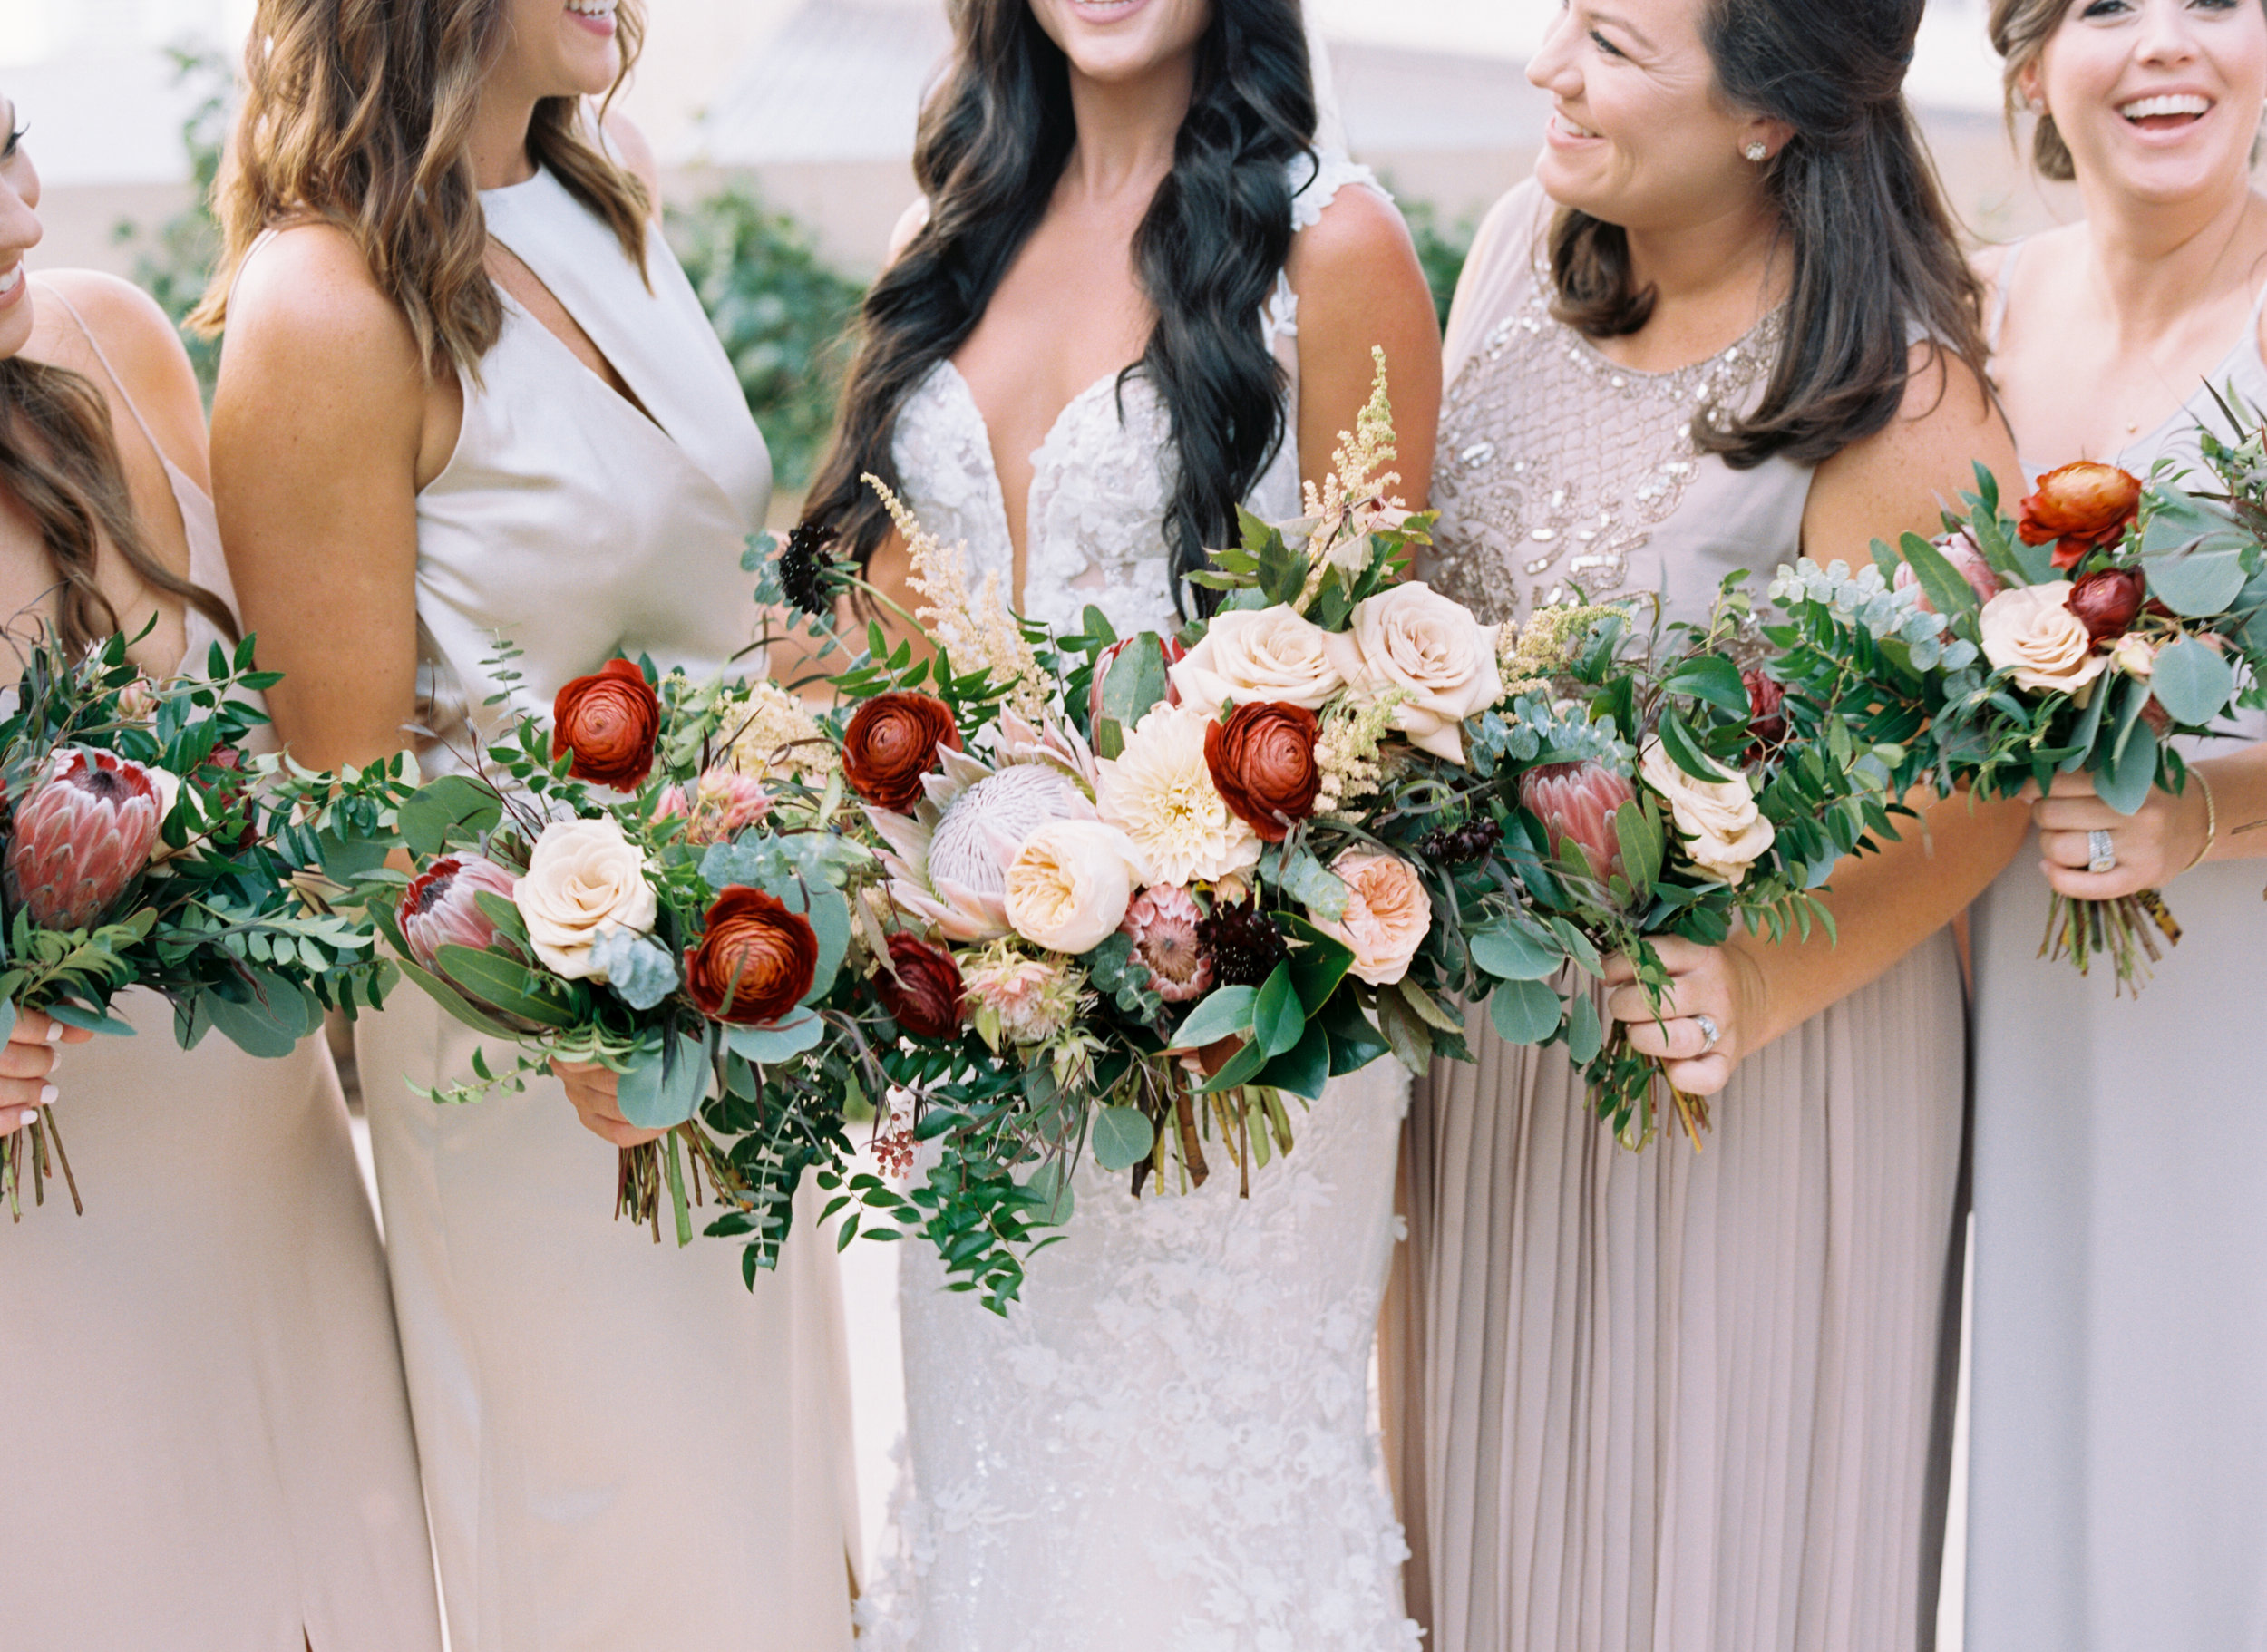 Muted pastel bridesmaid style with pops of marsala and burgundy florals // Nashville Wedding Floral Design